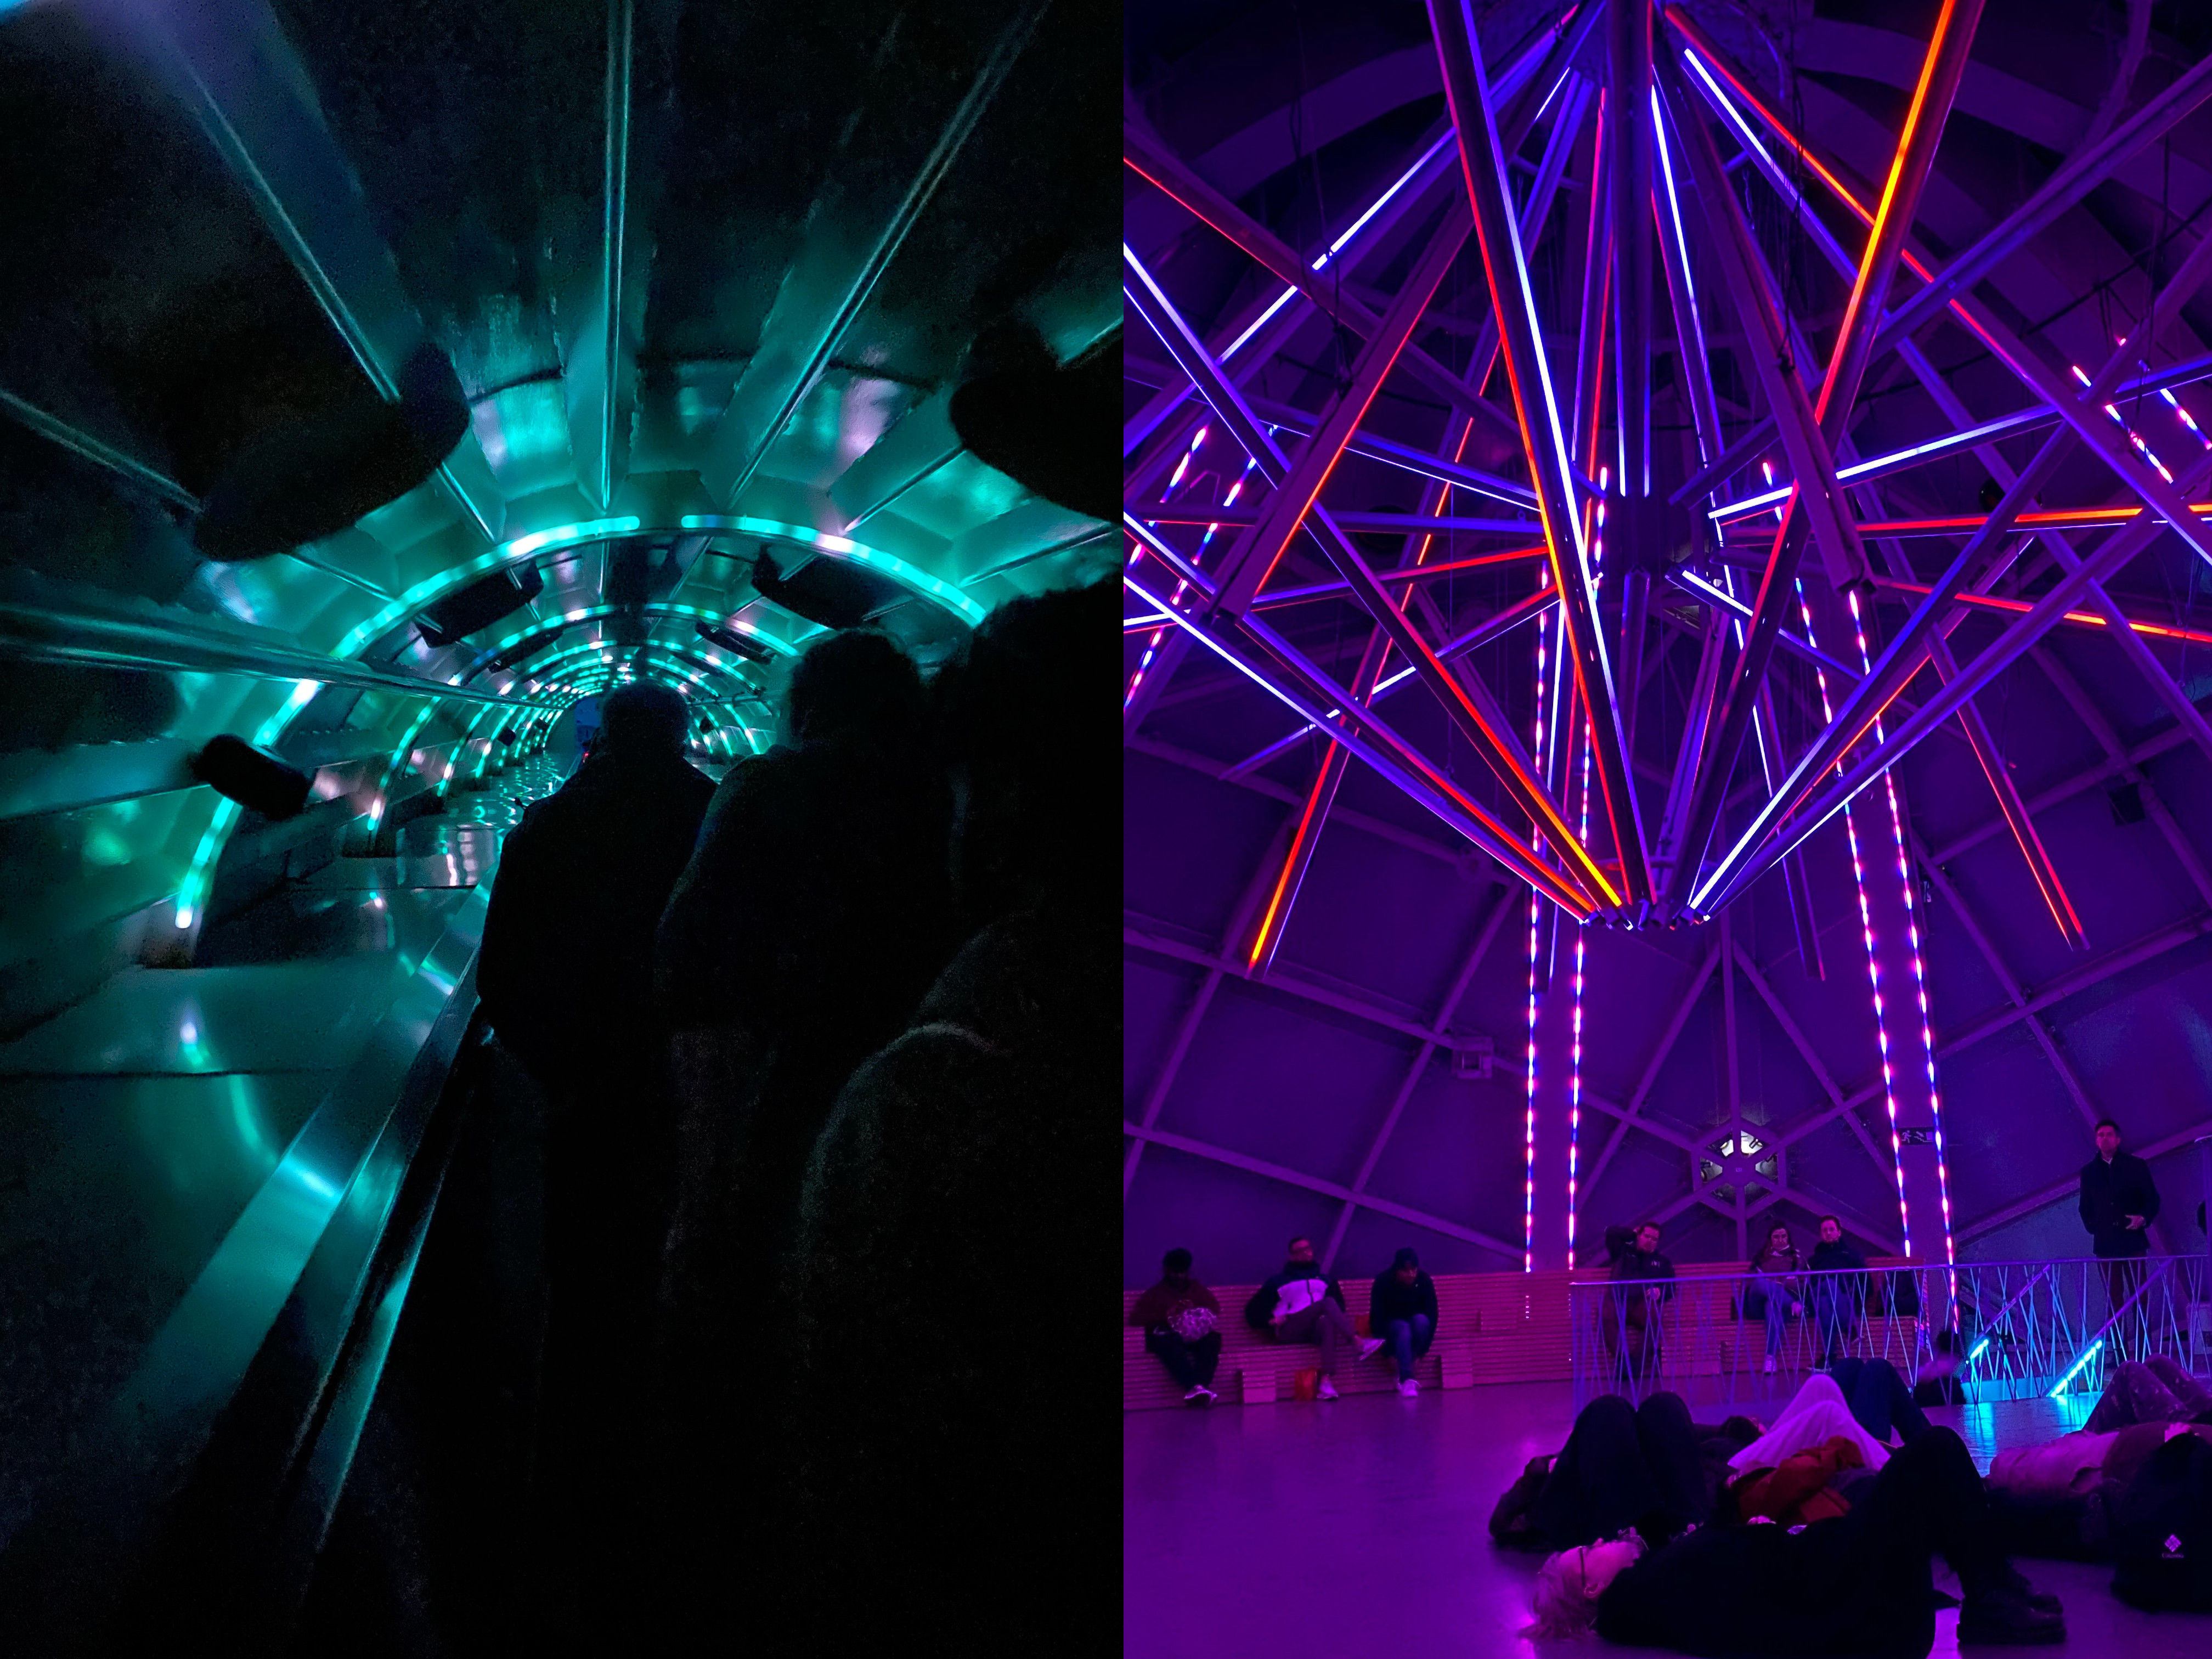 two images, students going through a tunnel of light and students lying under a light show